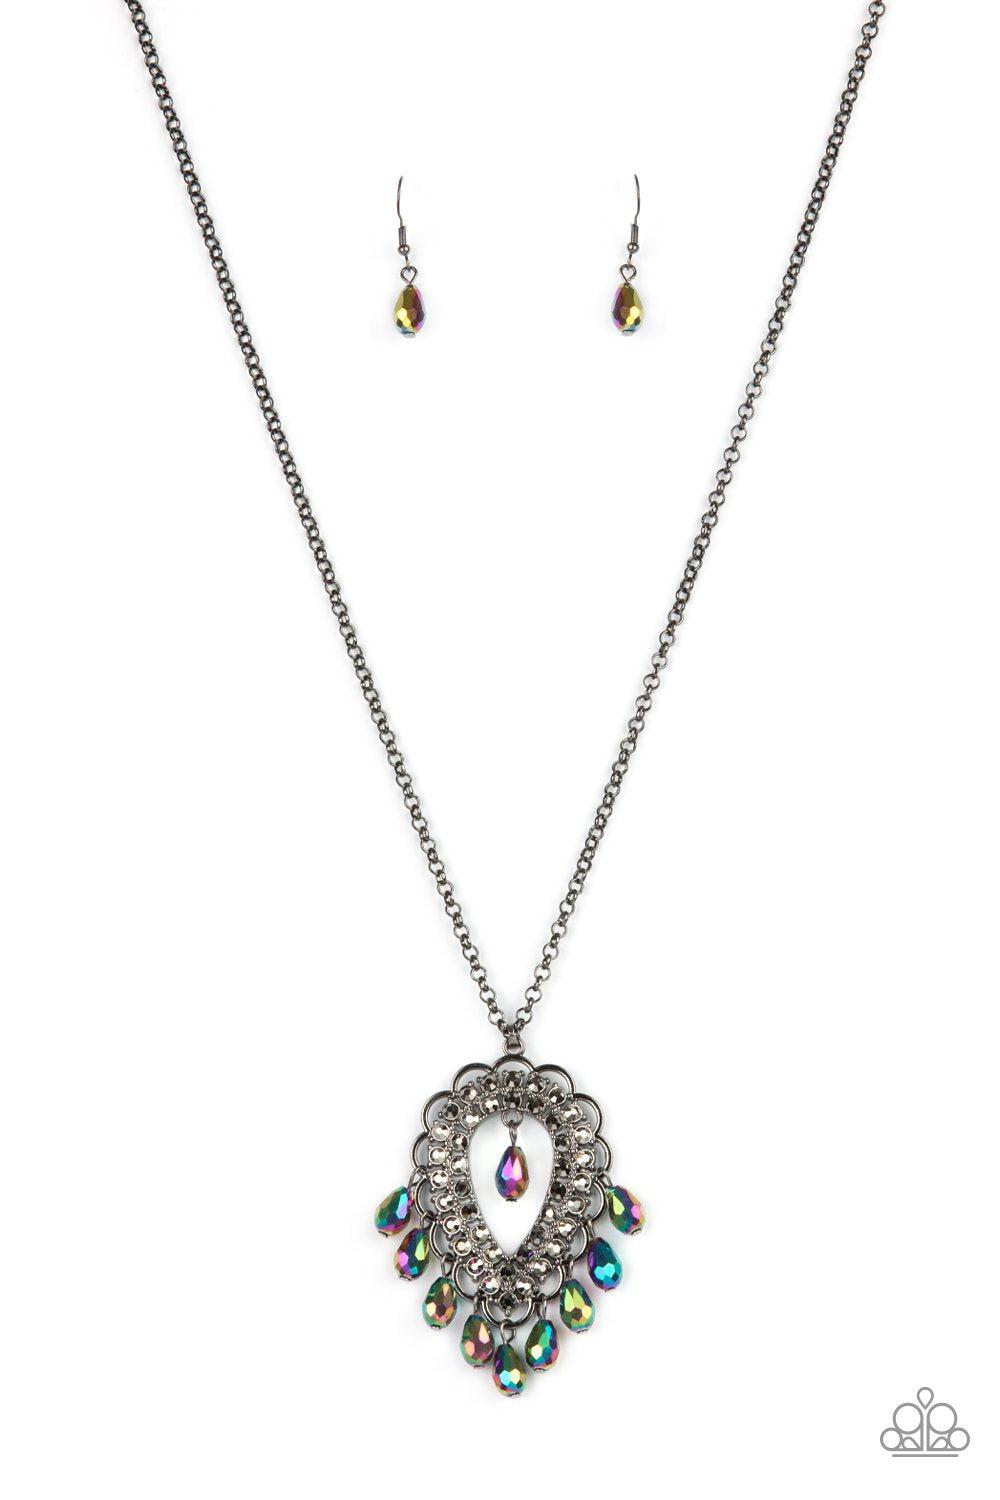 Teasable Teardrops Multi &quot;Oil Spill&quot; Pendant Necklace - Paparazzi Accessories Life of the Party Exclusive May 2021- lightbox - CarasShop.com - $5 Jewelry by Cara Jewels